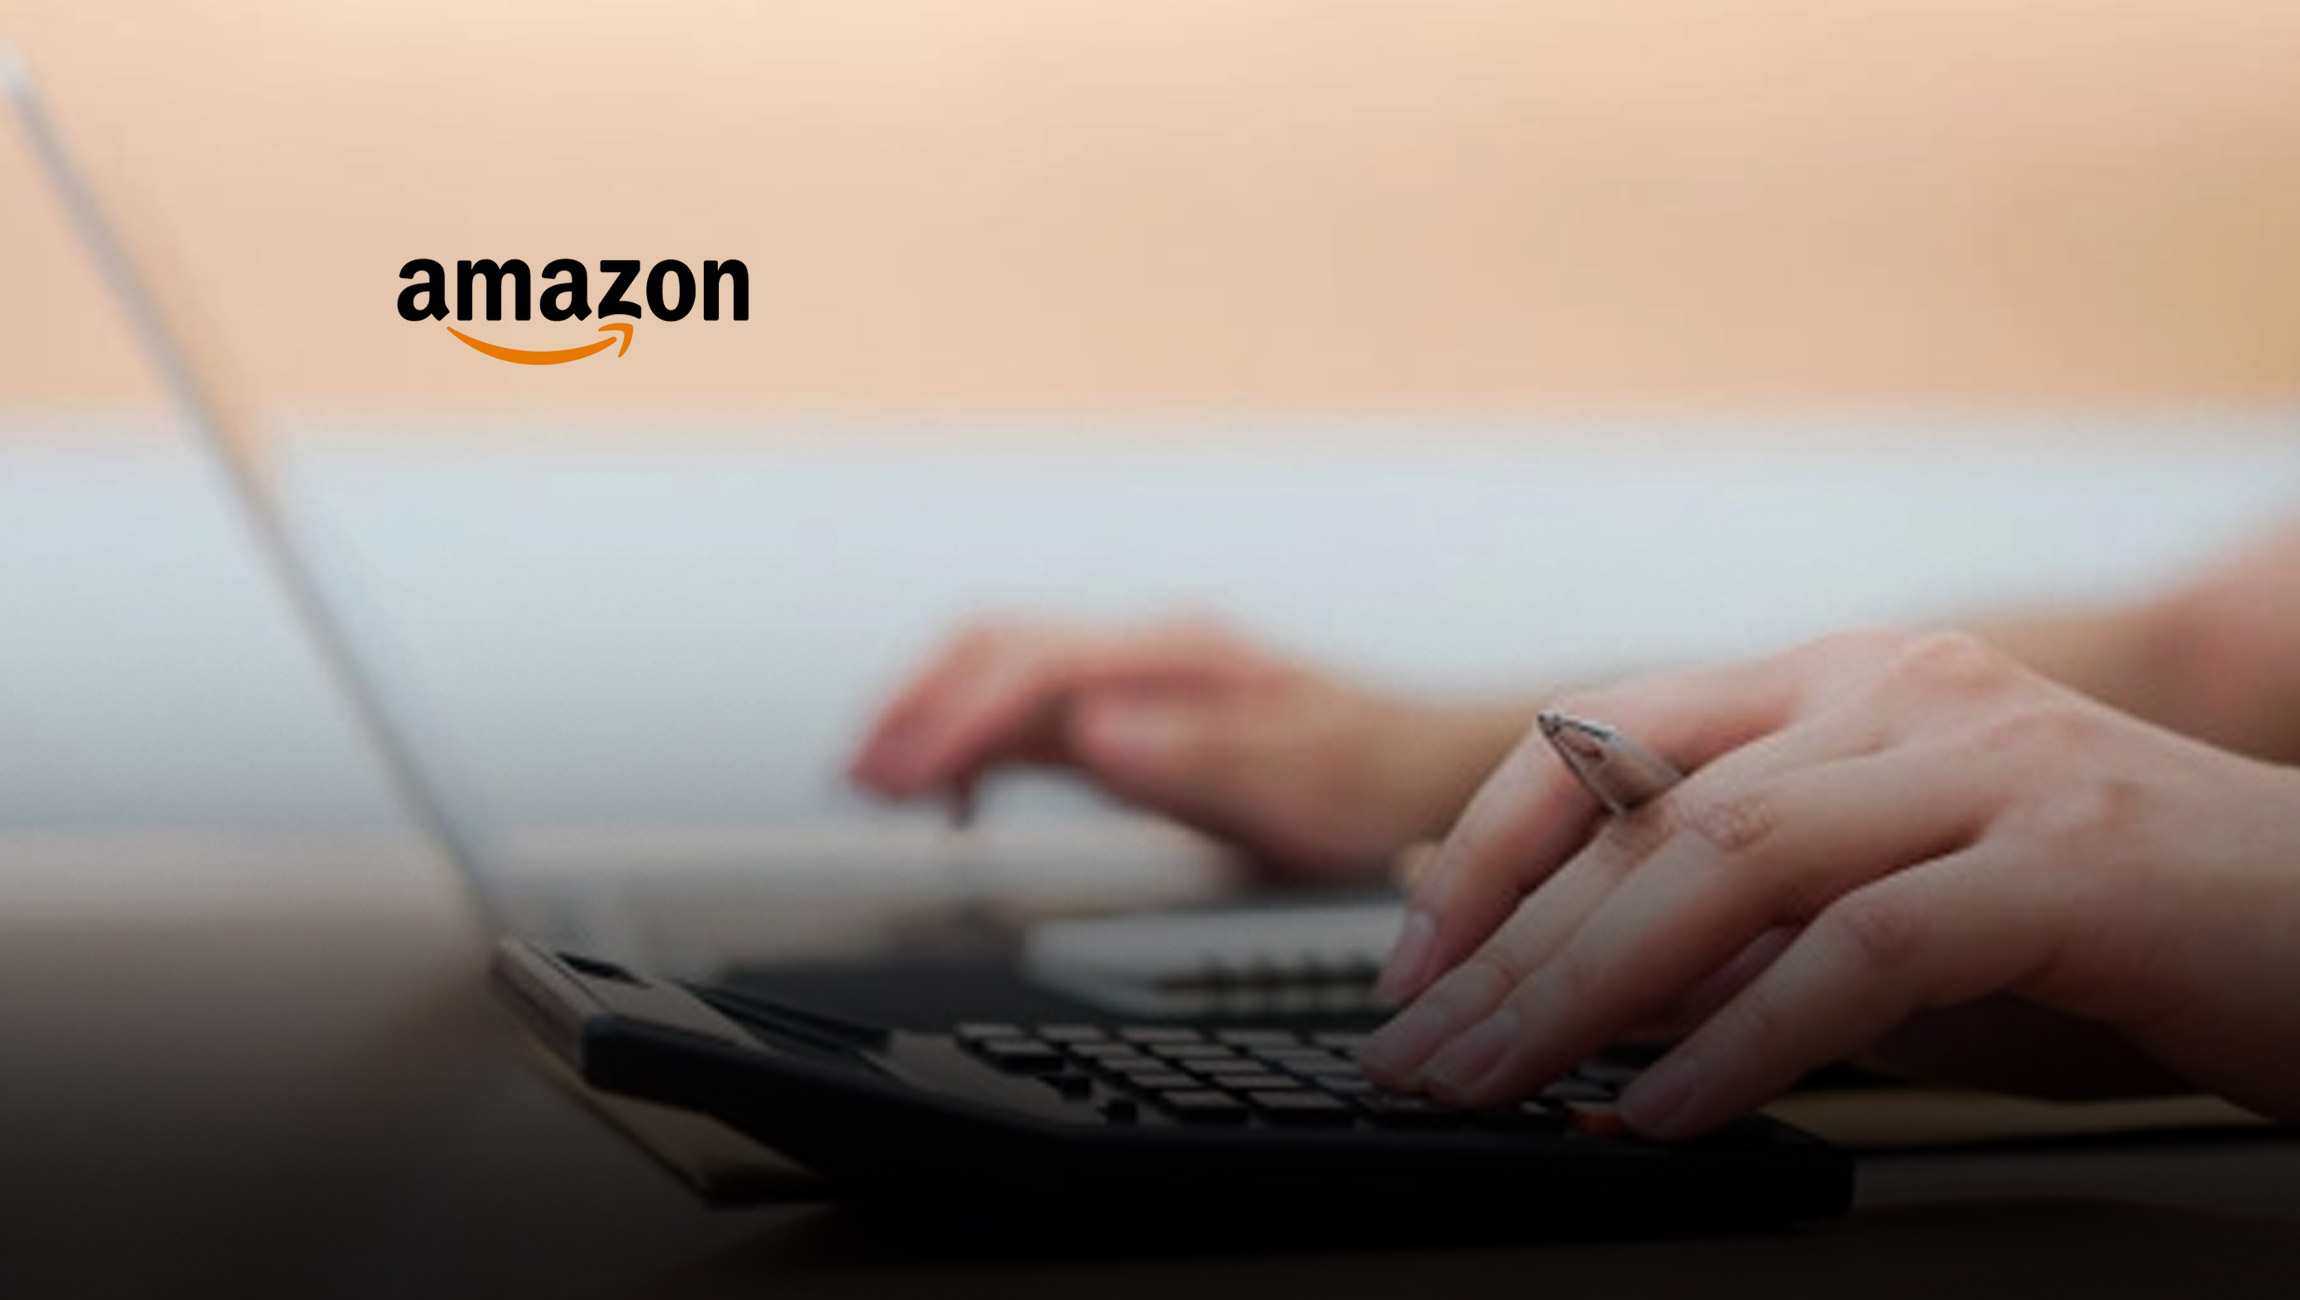 AWS Announces Five New Capabilities for Amazon Connect, Helping Customer Service Representatives Offer More Personalized, Efficient, and Effective Experiences for Customers—All Powered by AWS’s Industry-Leading Machine Learning Technology